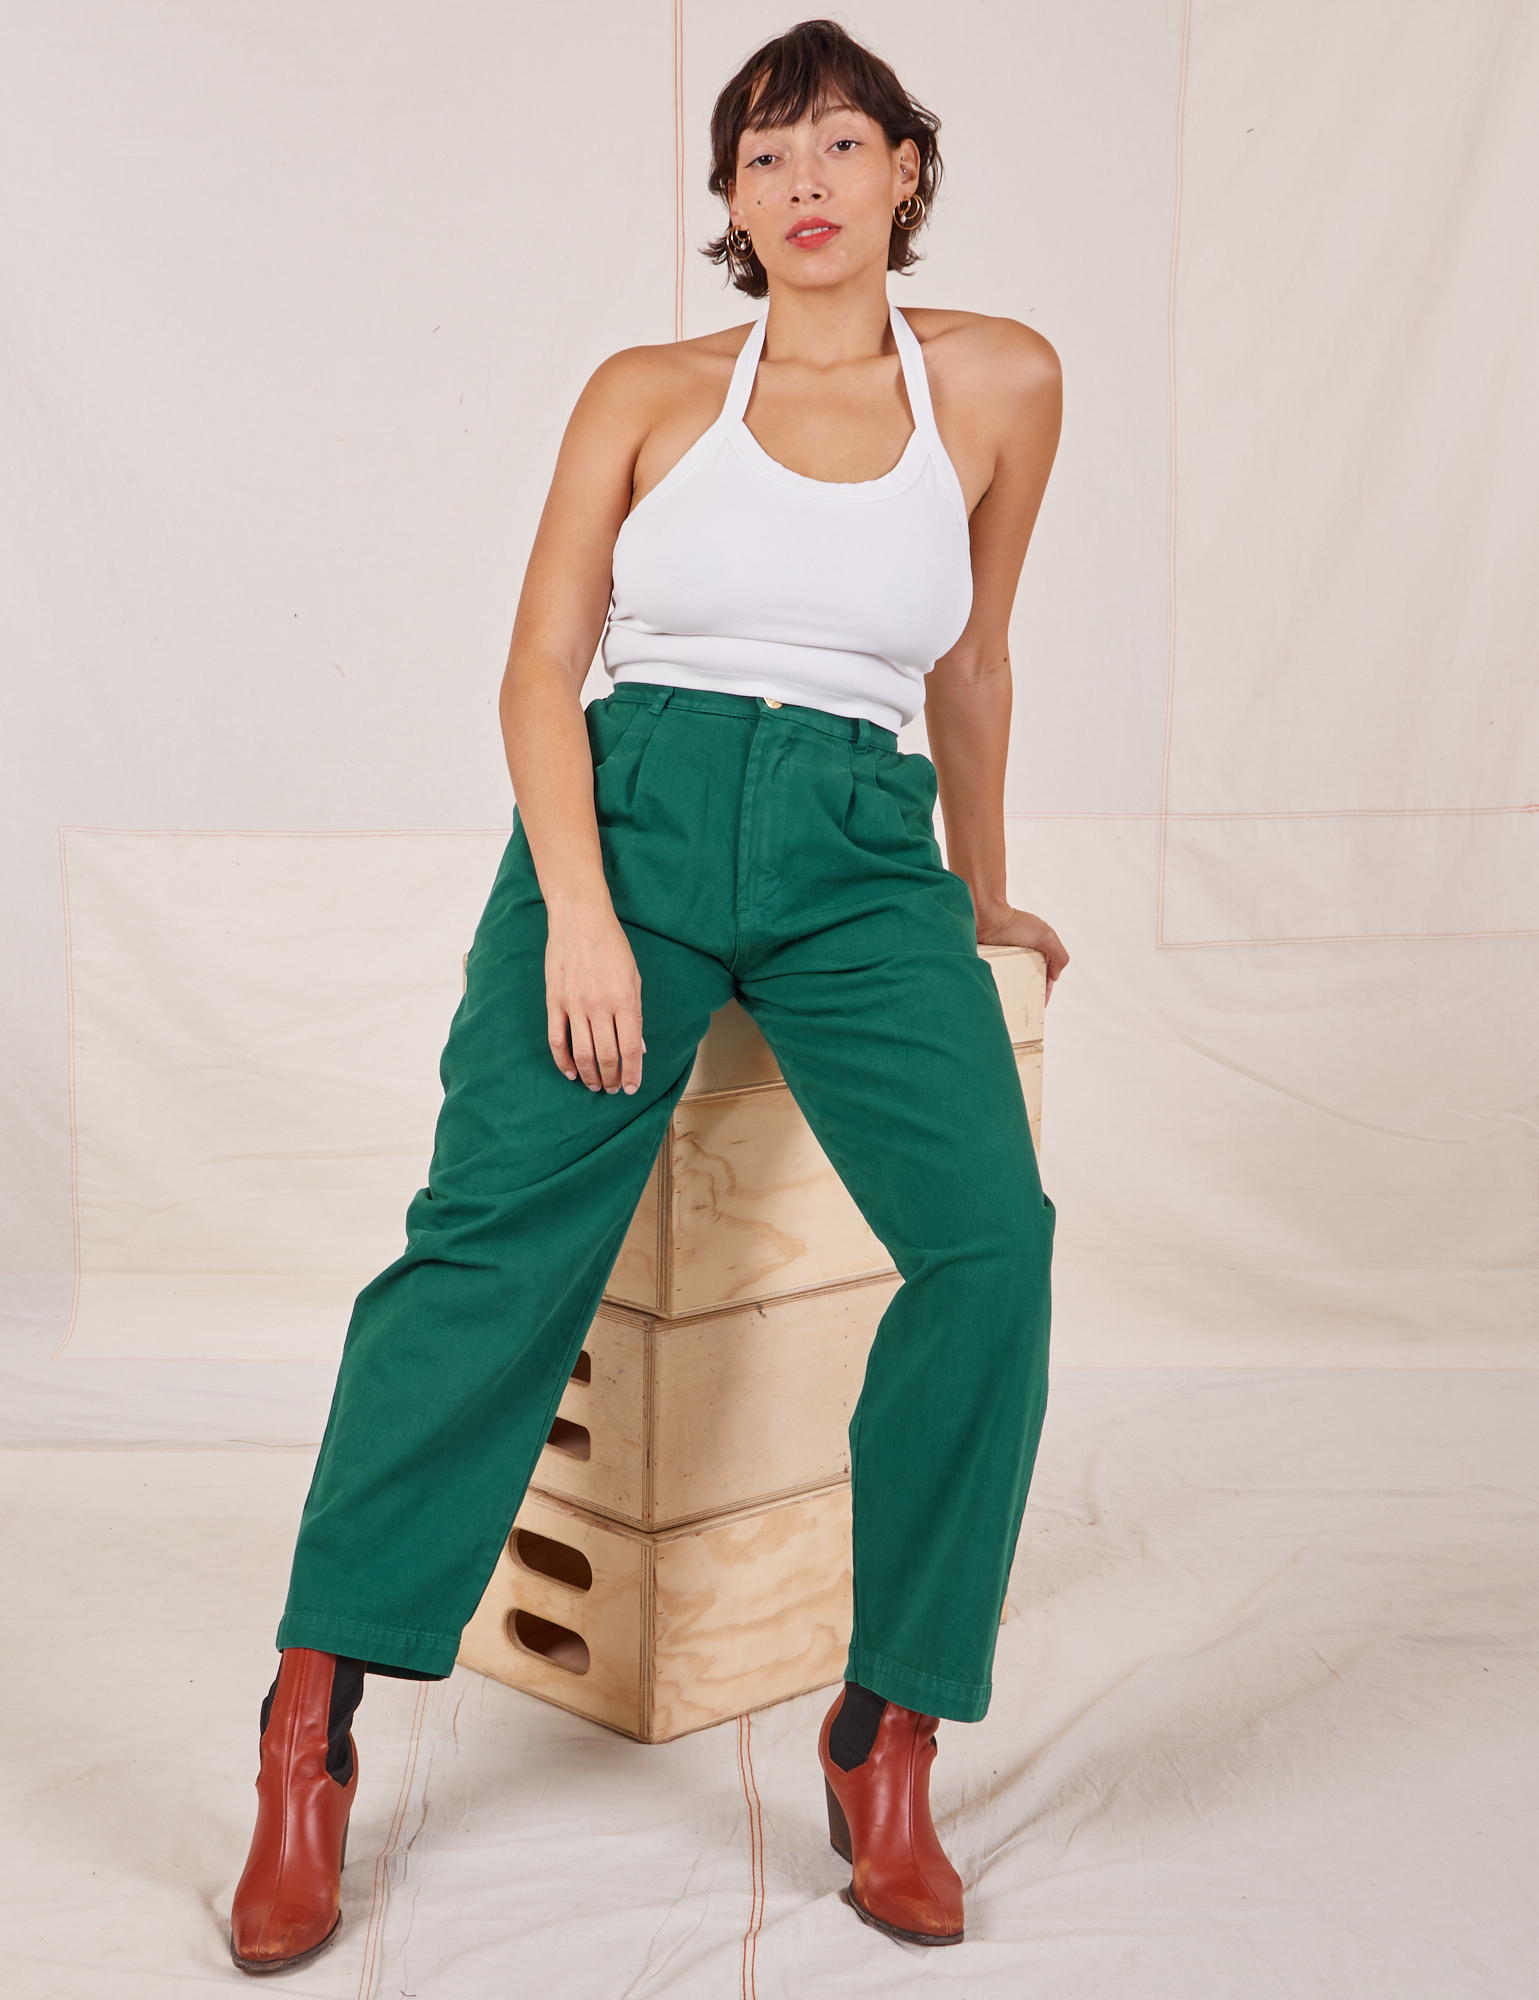 Tiara is sitting on a stack of wooden crates wearing Heavyweight Trousers in Hunter Green and vintage off-white Halter Top